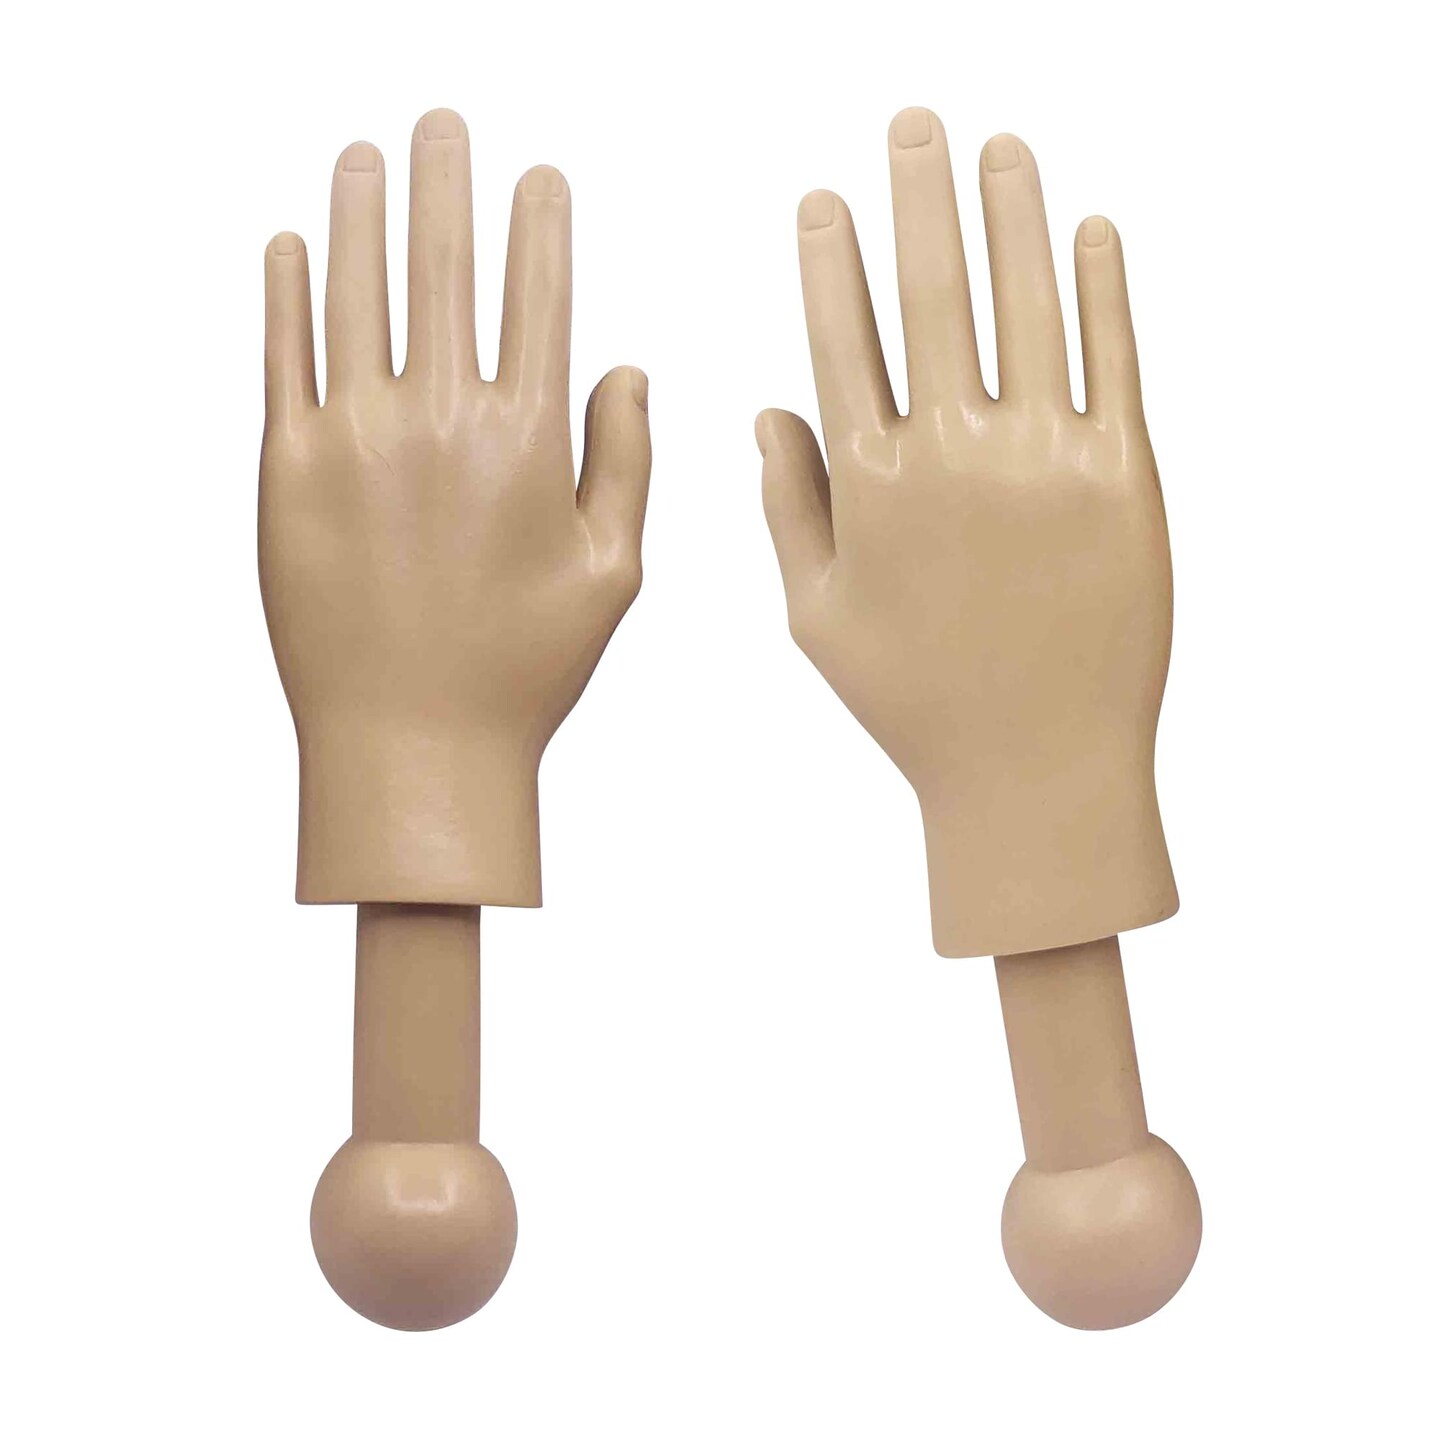 Tiny Hands 4.5-Inch Novelty Toys | Left and Right Hands, Beige